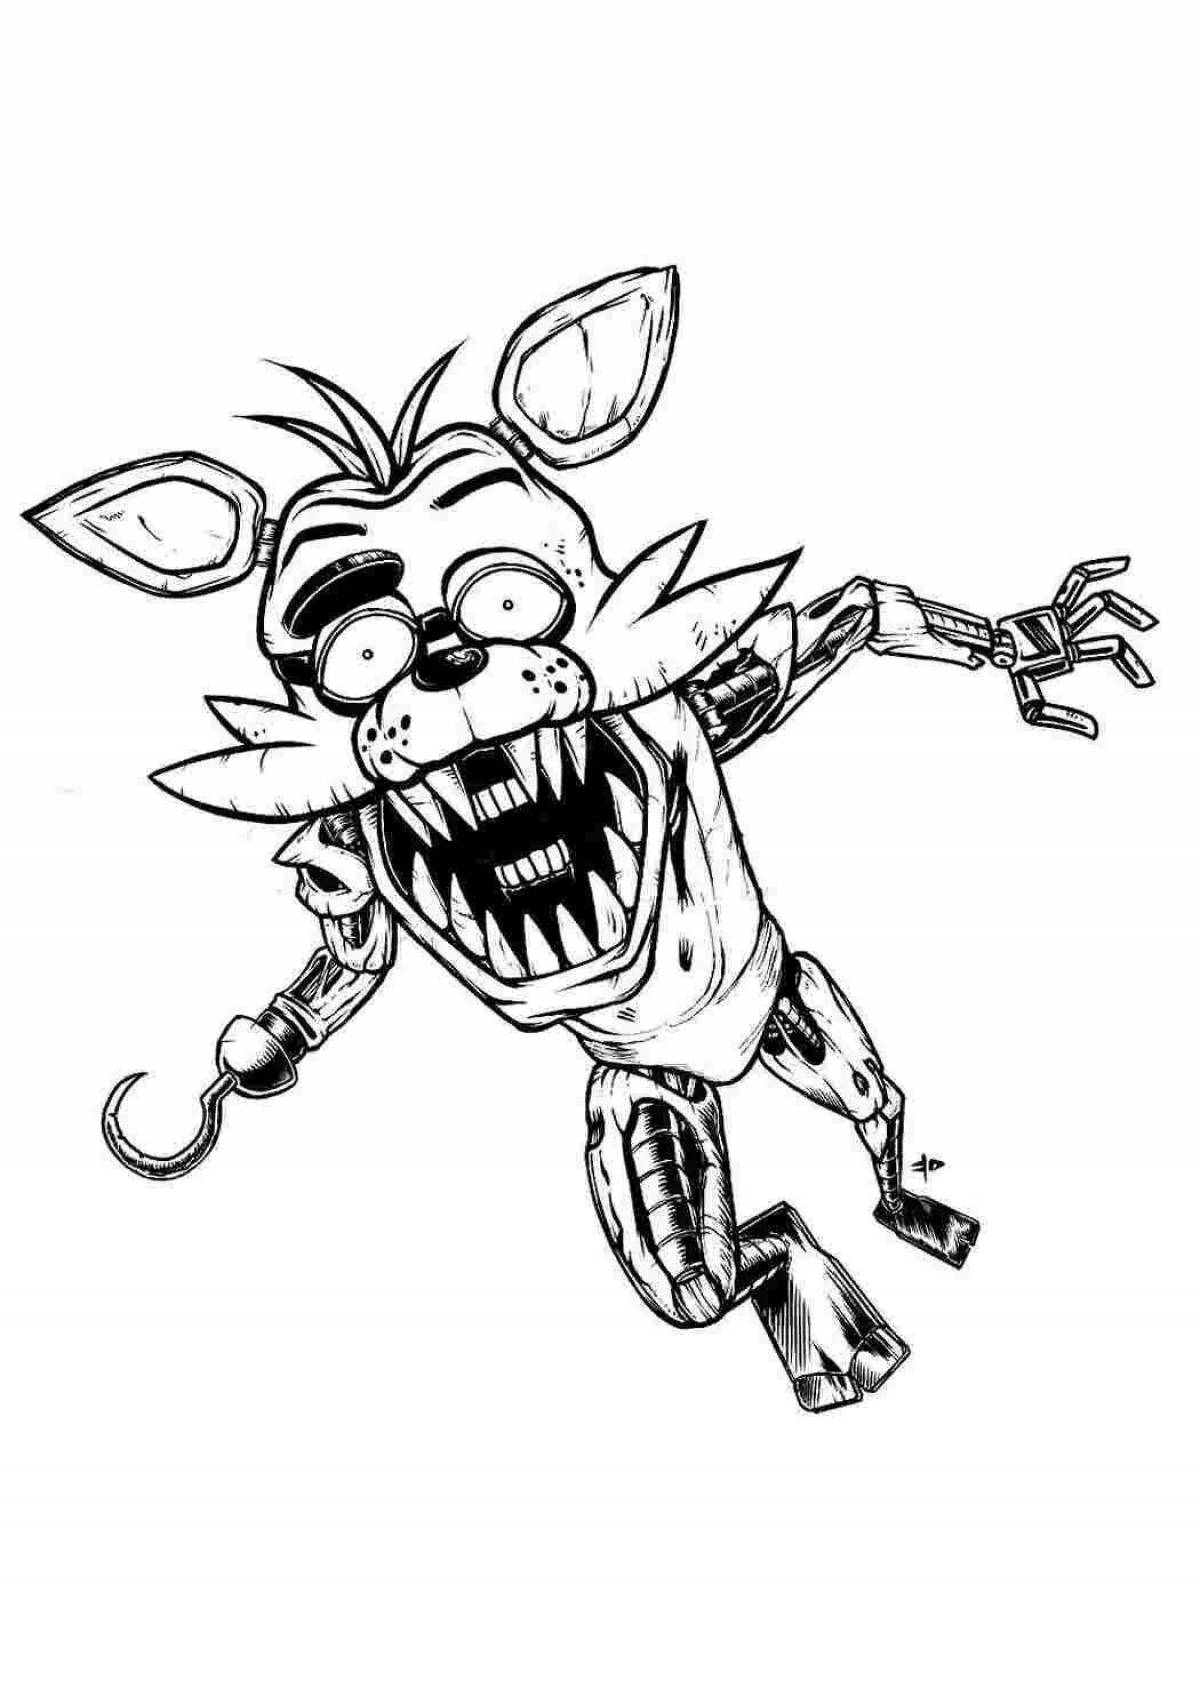 Outstanding fnaf 9 coloring book for boys